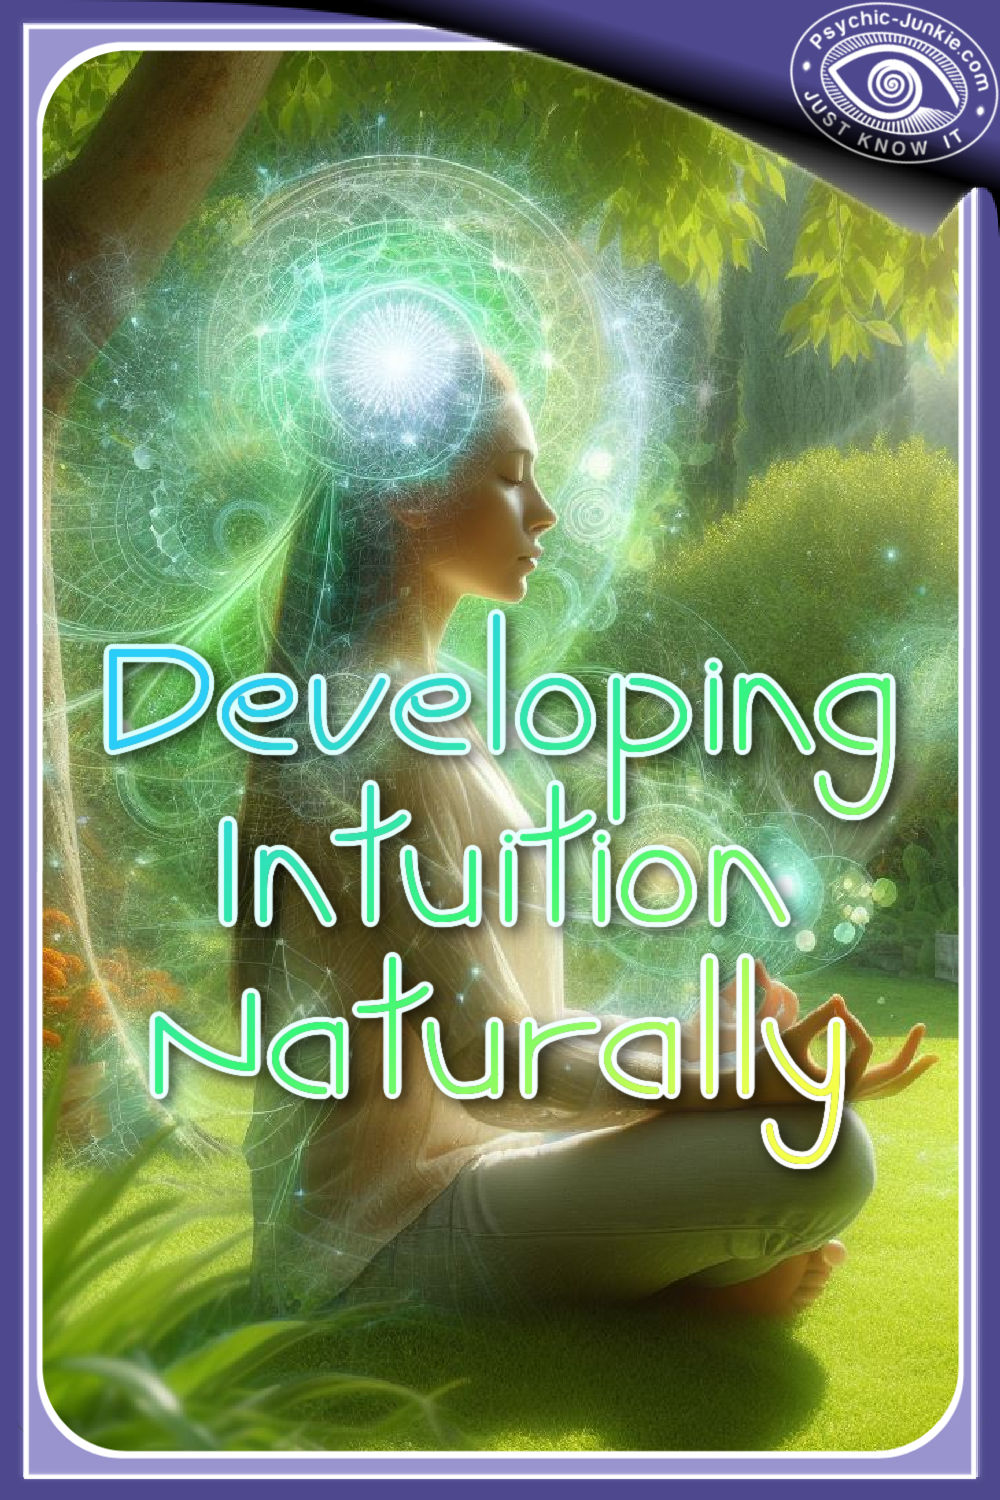 Meditation Is A Natural Way To Develop Your Intuition